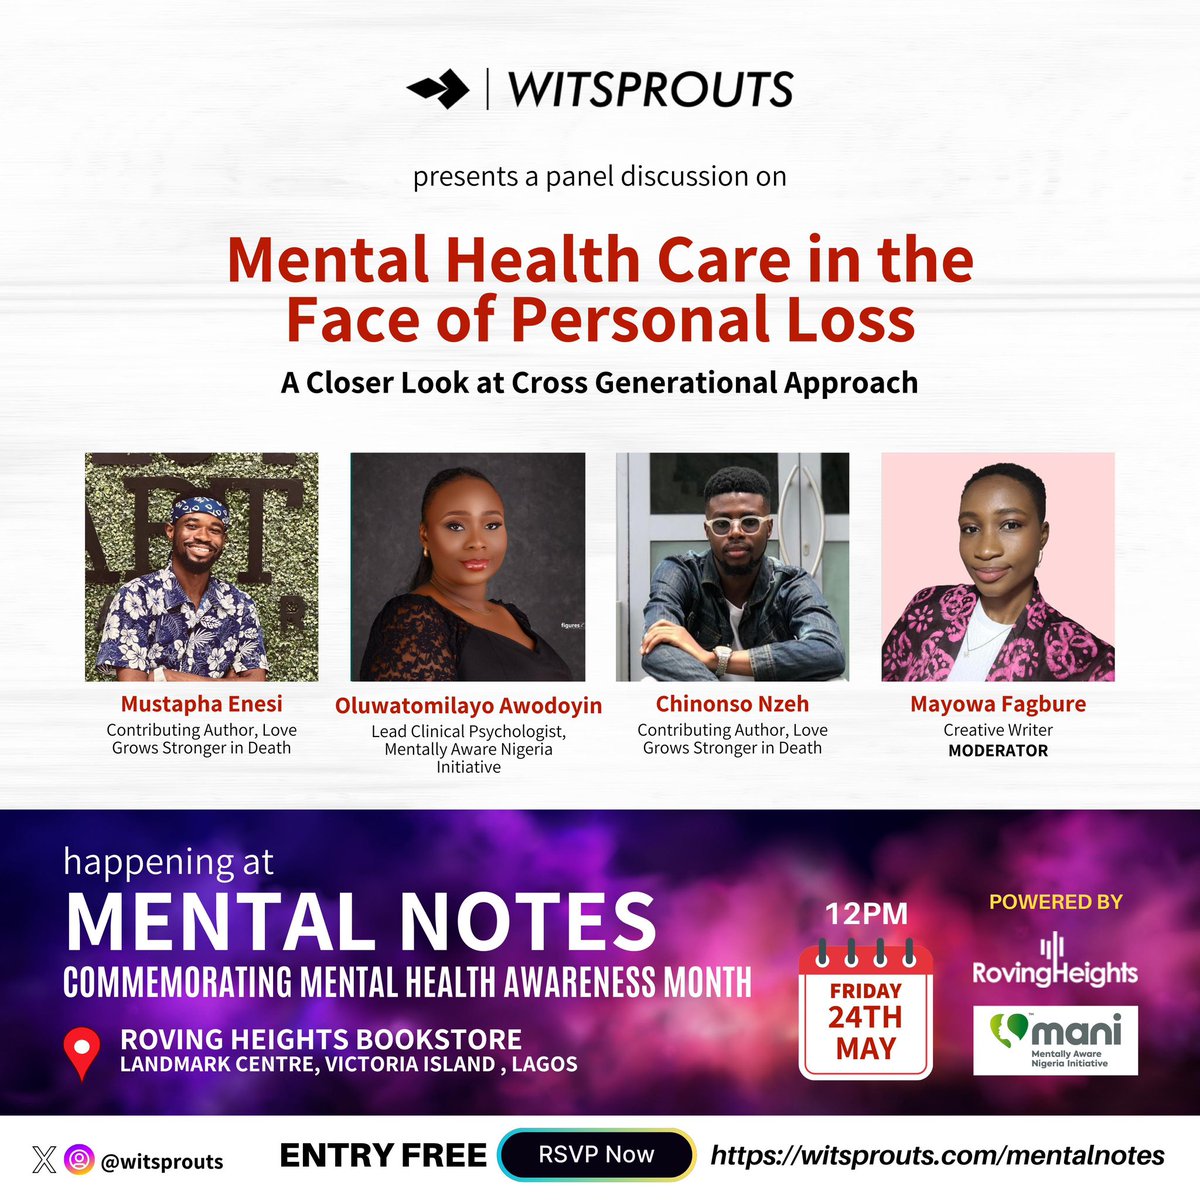 To commemorate Global Mental Health Awareness Month, we're pleased to host a panel discussion themed 'Mental Health Care in the Face of Personal Loss' in partnership with @MentallyAwareNG during the book reading event for LGSID happening this Friday. RSVP: witsprouts.com/mentalnotes